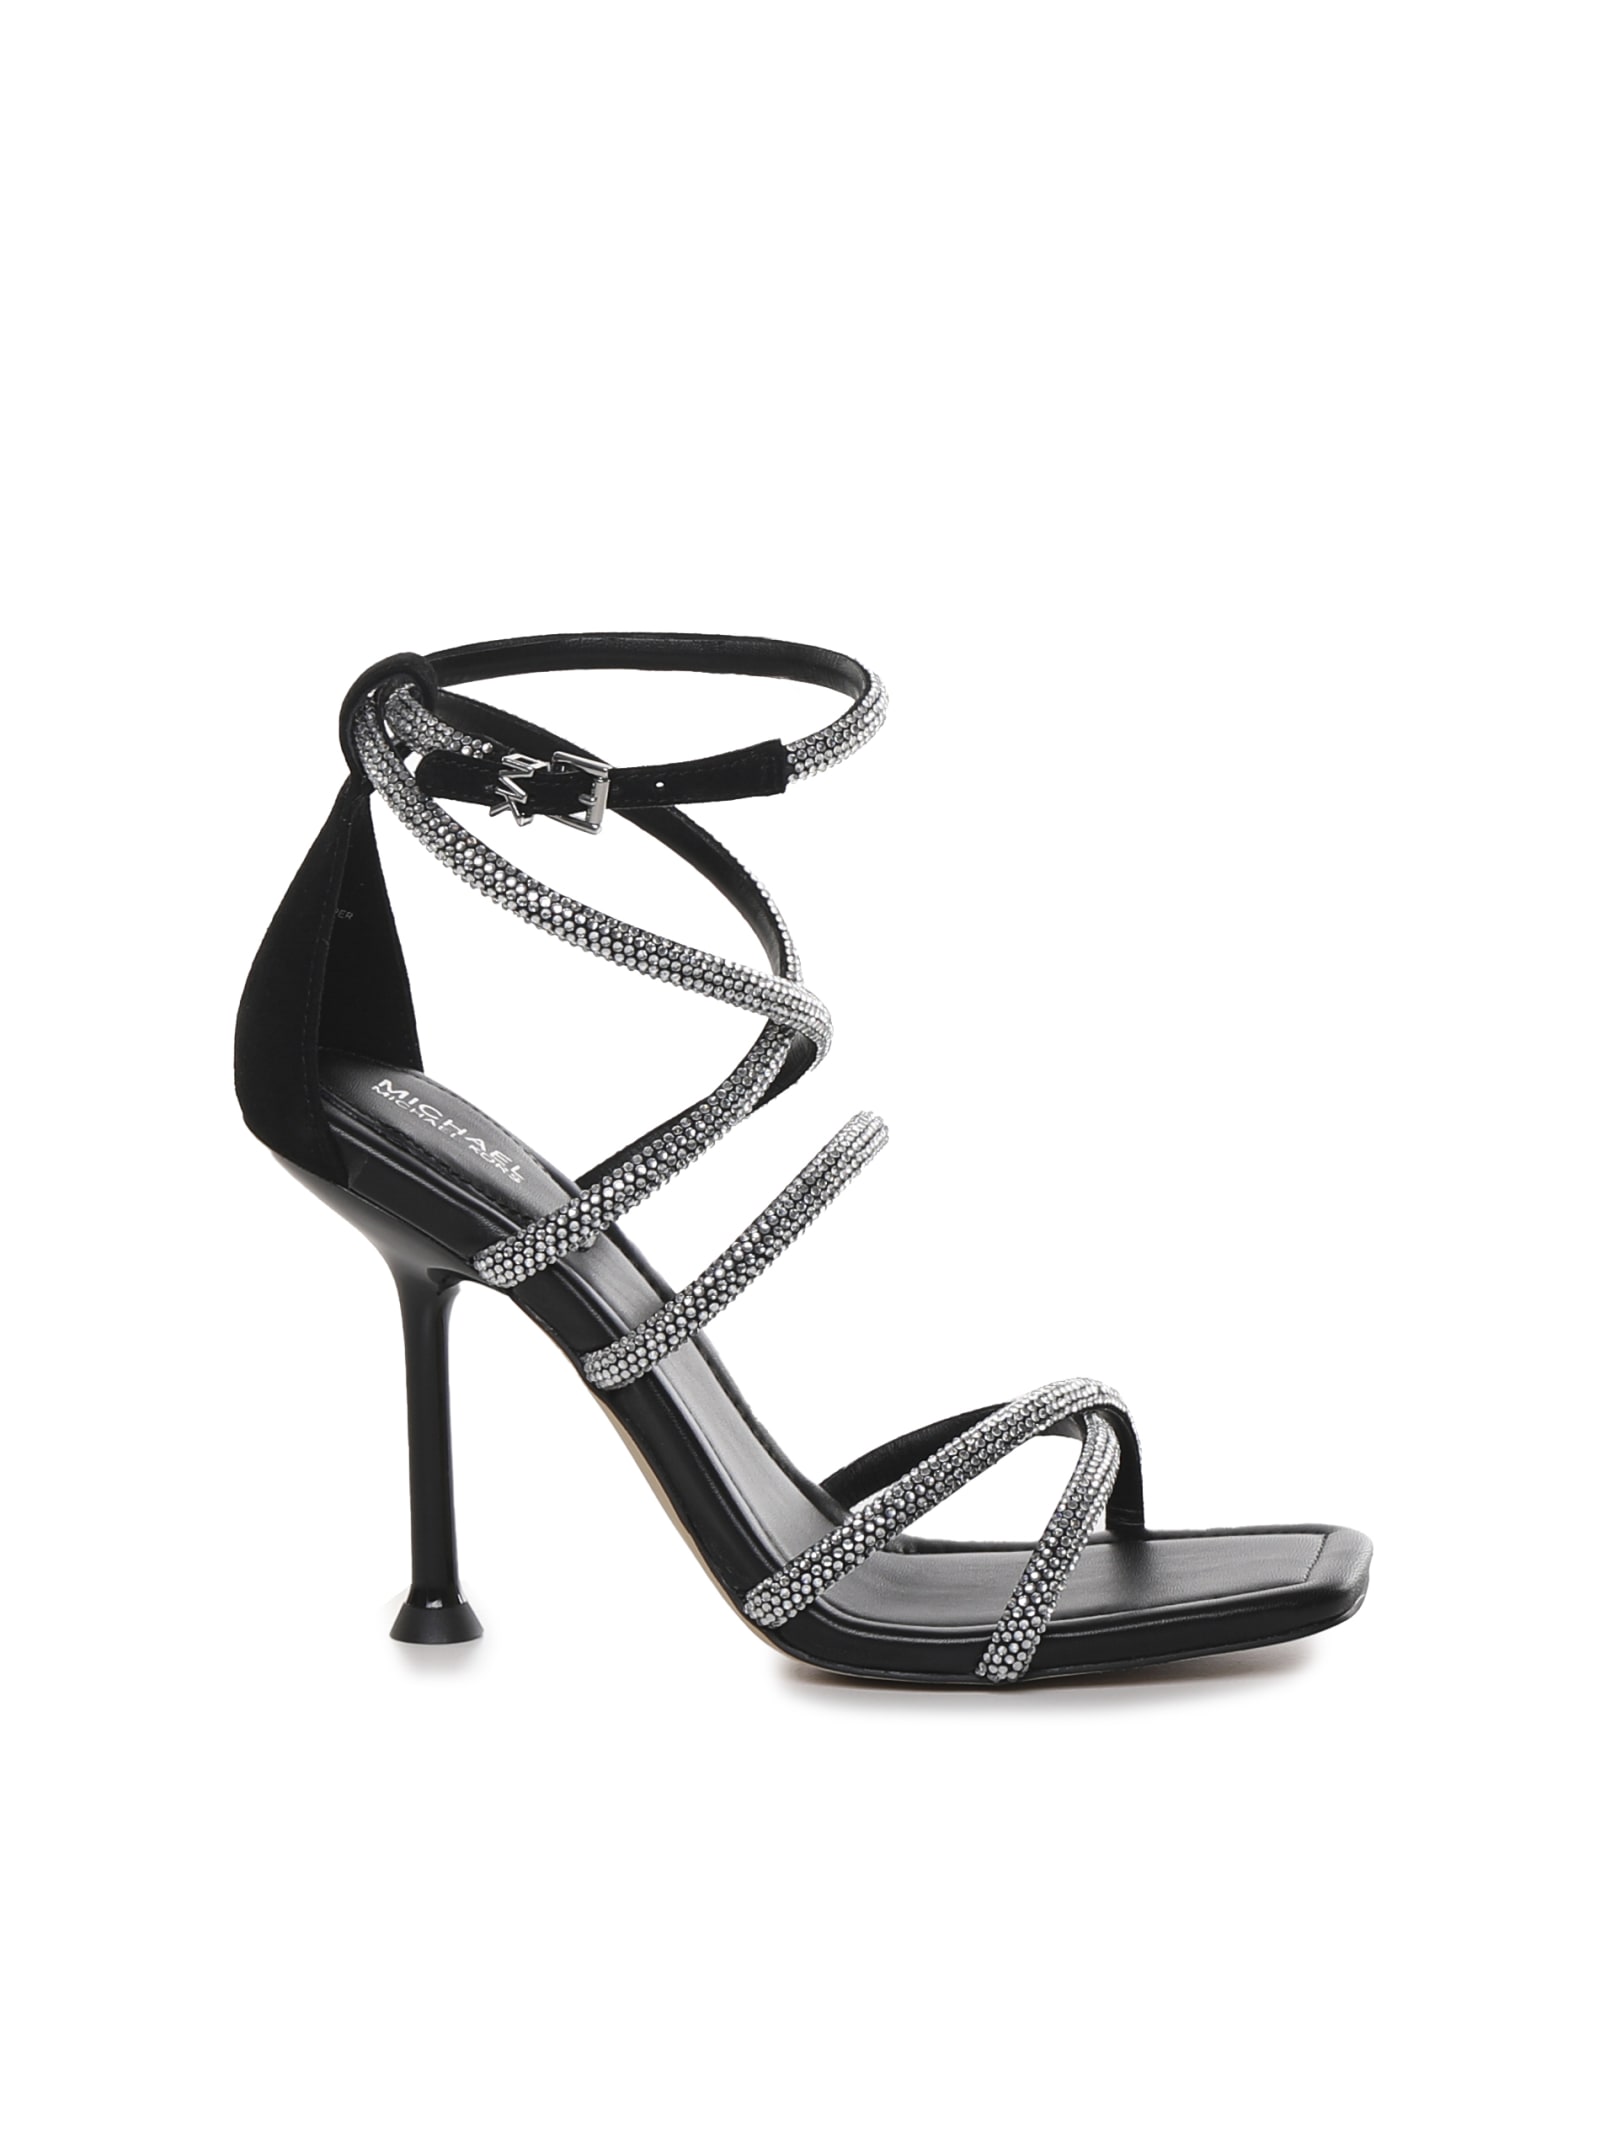 Michael Kors Sandals With Crystal Decoration